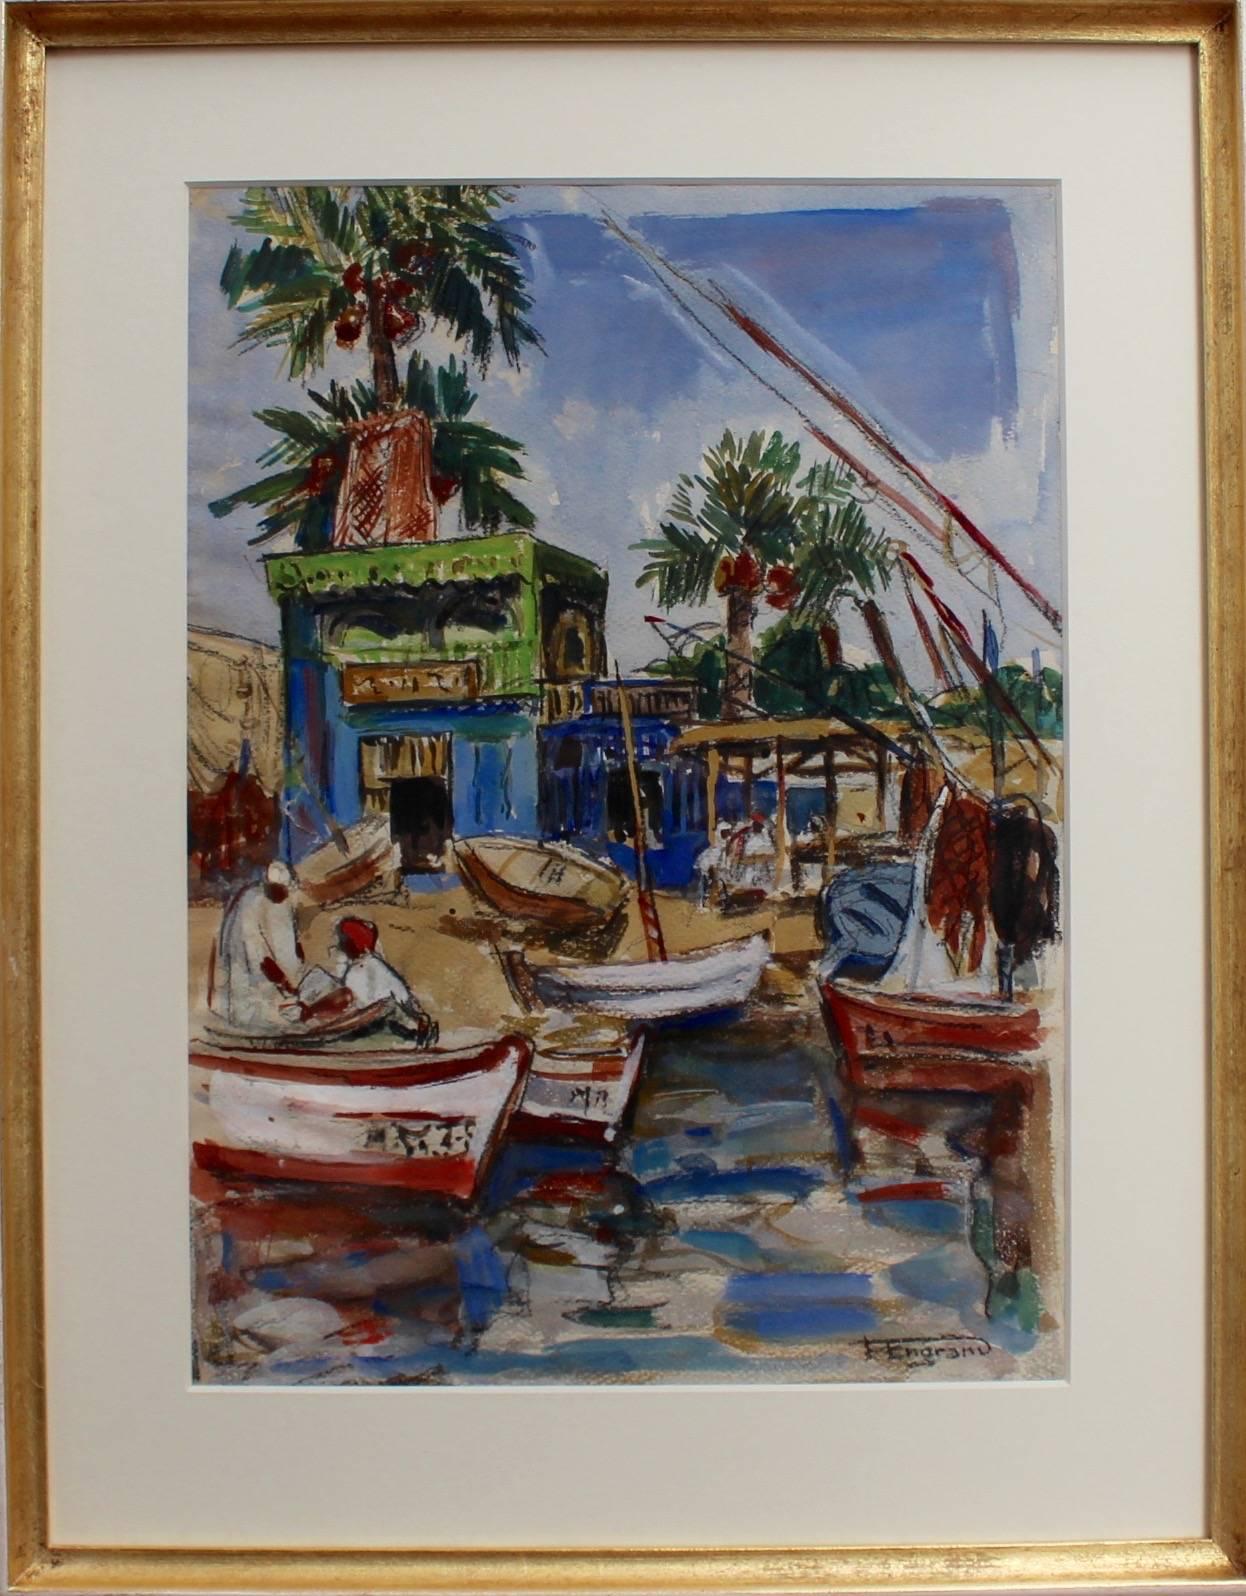 Unknown Figurative Painting - 'Mediterranean Fishing Village' by F Engram